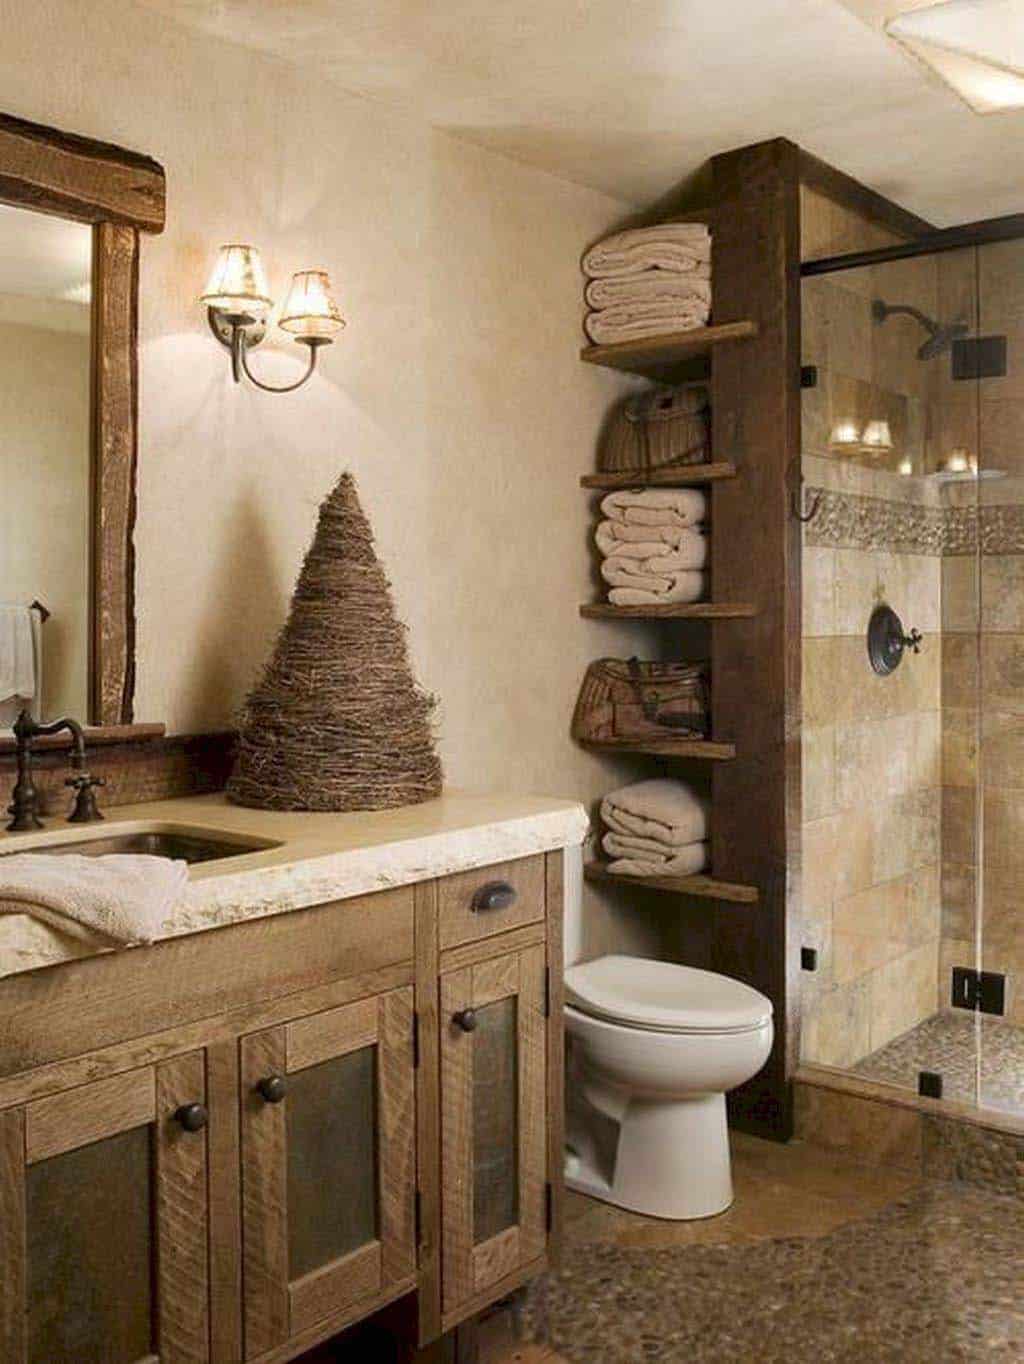 Rustic bathroom vanity with open shelving and glass-enclosed shower